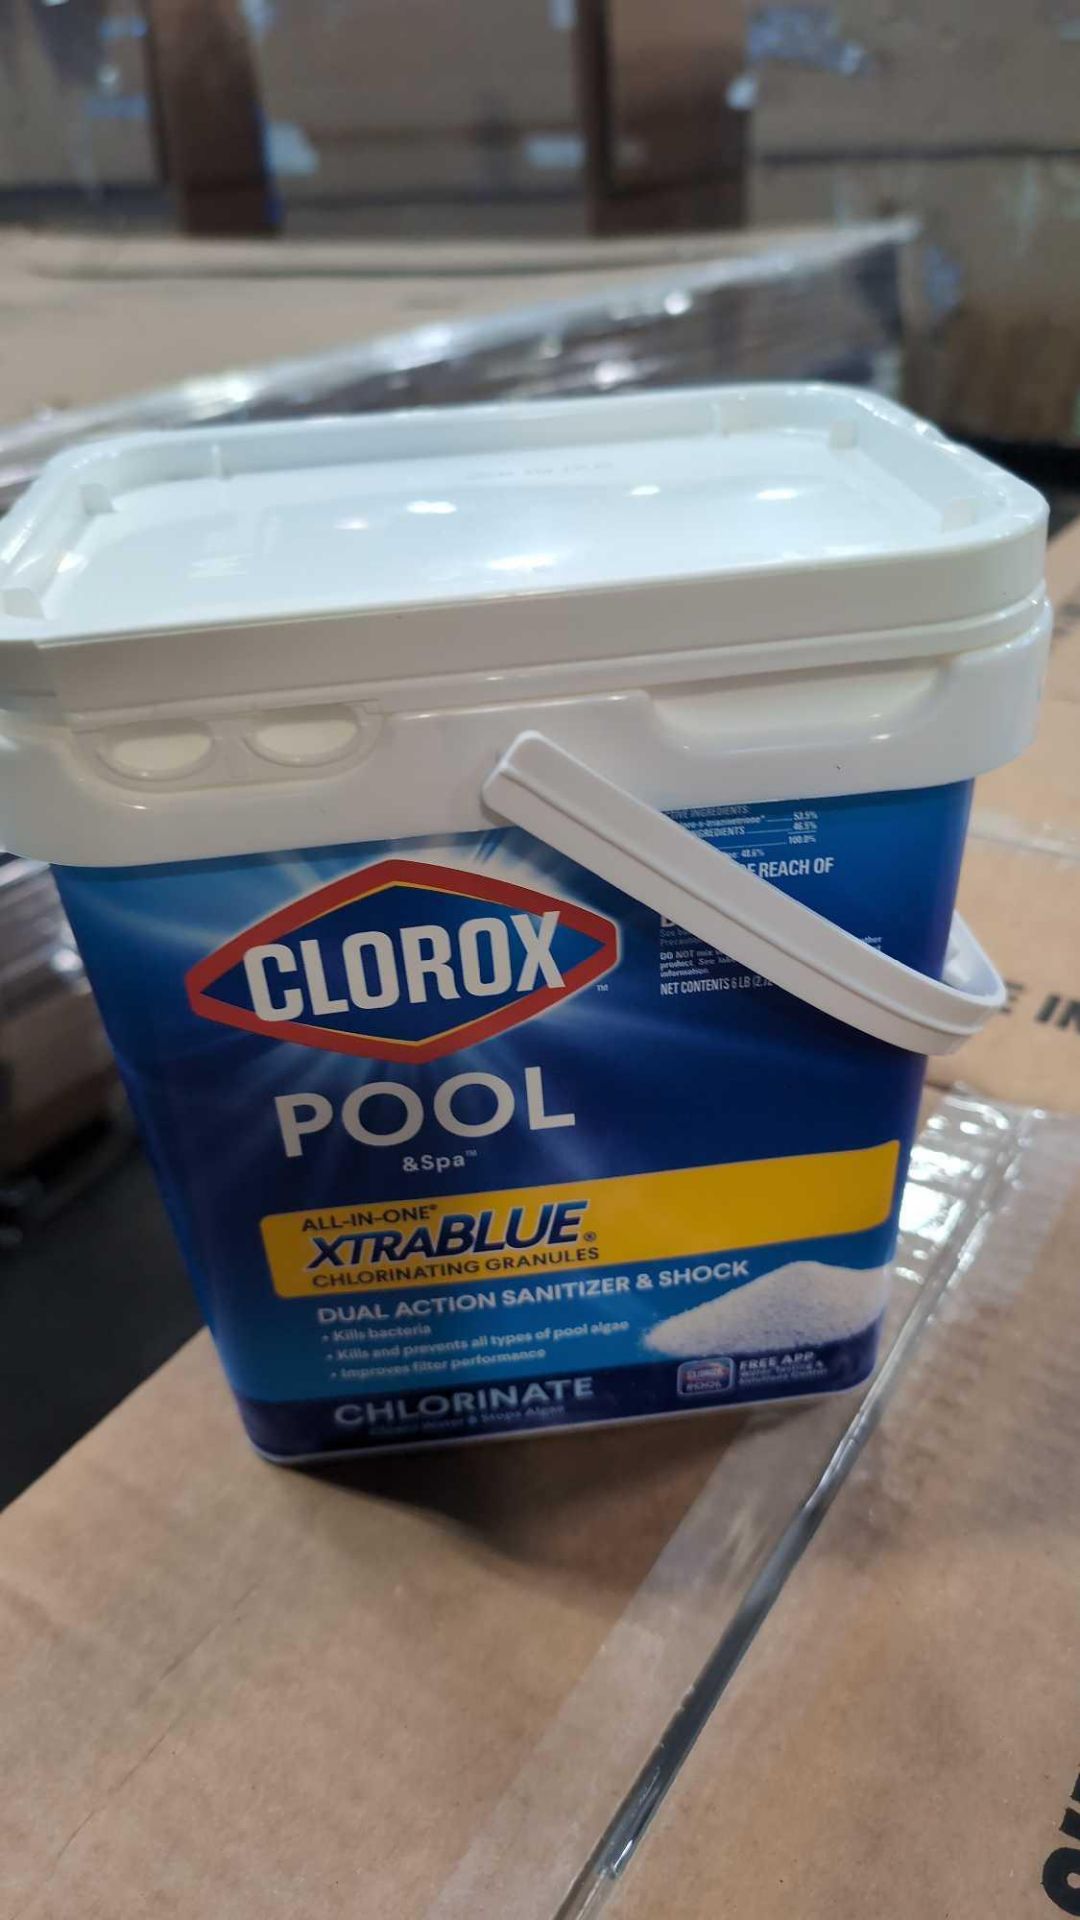 Clorox Pool All-in-one Xtrablue Chlorinating Granules - Image 5 of 7